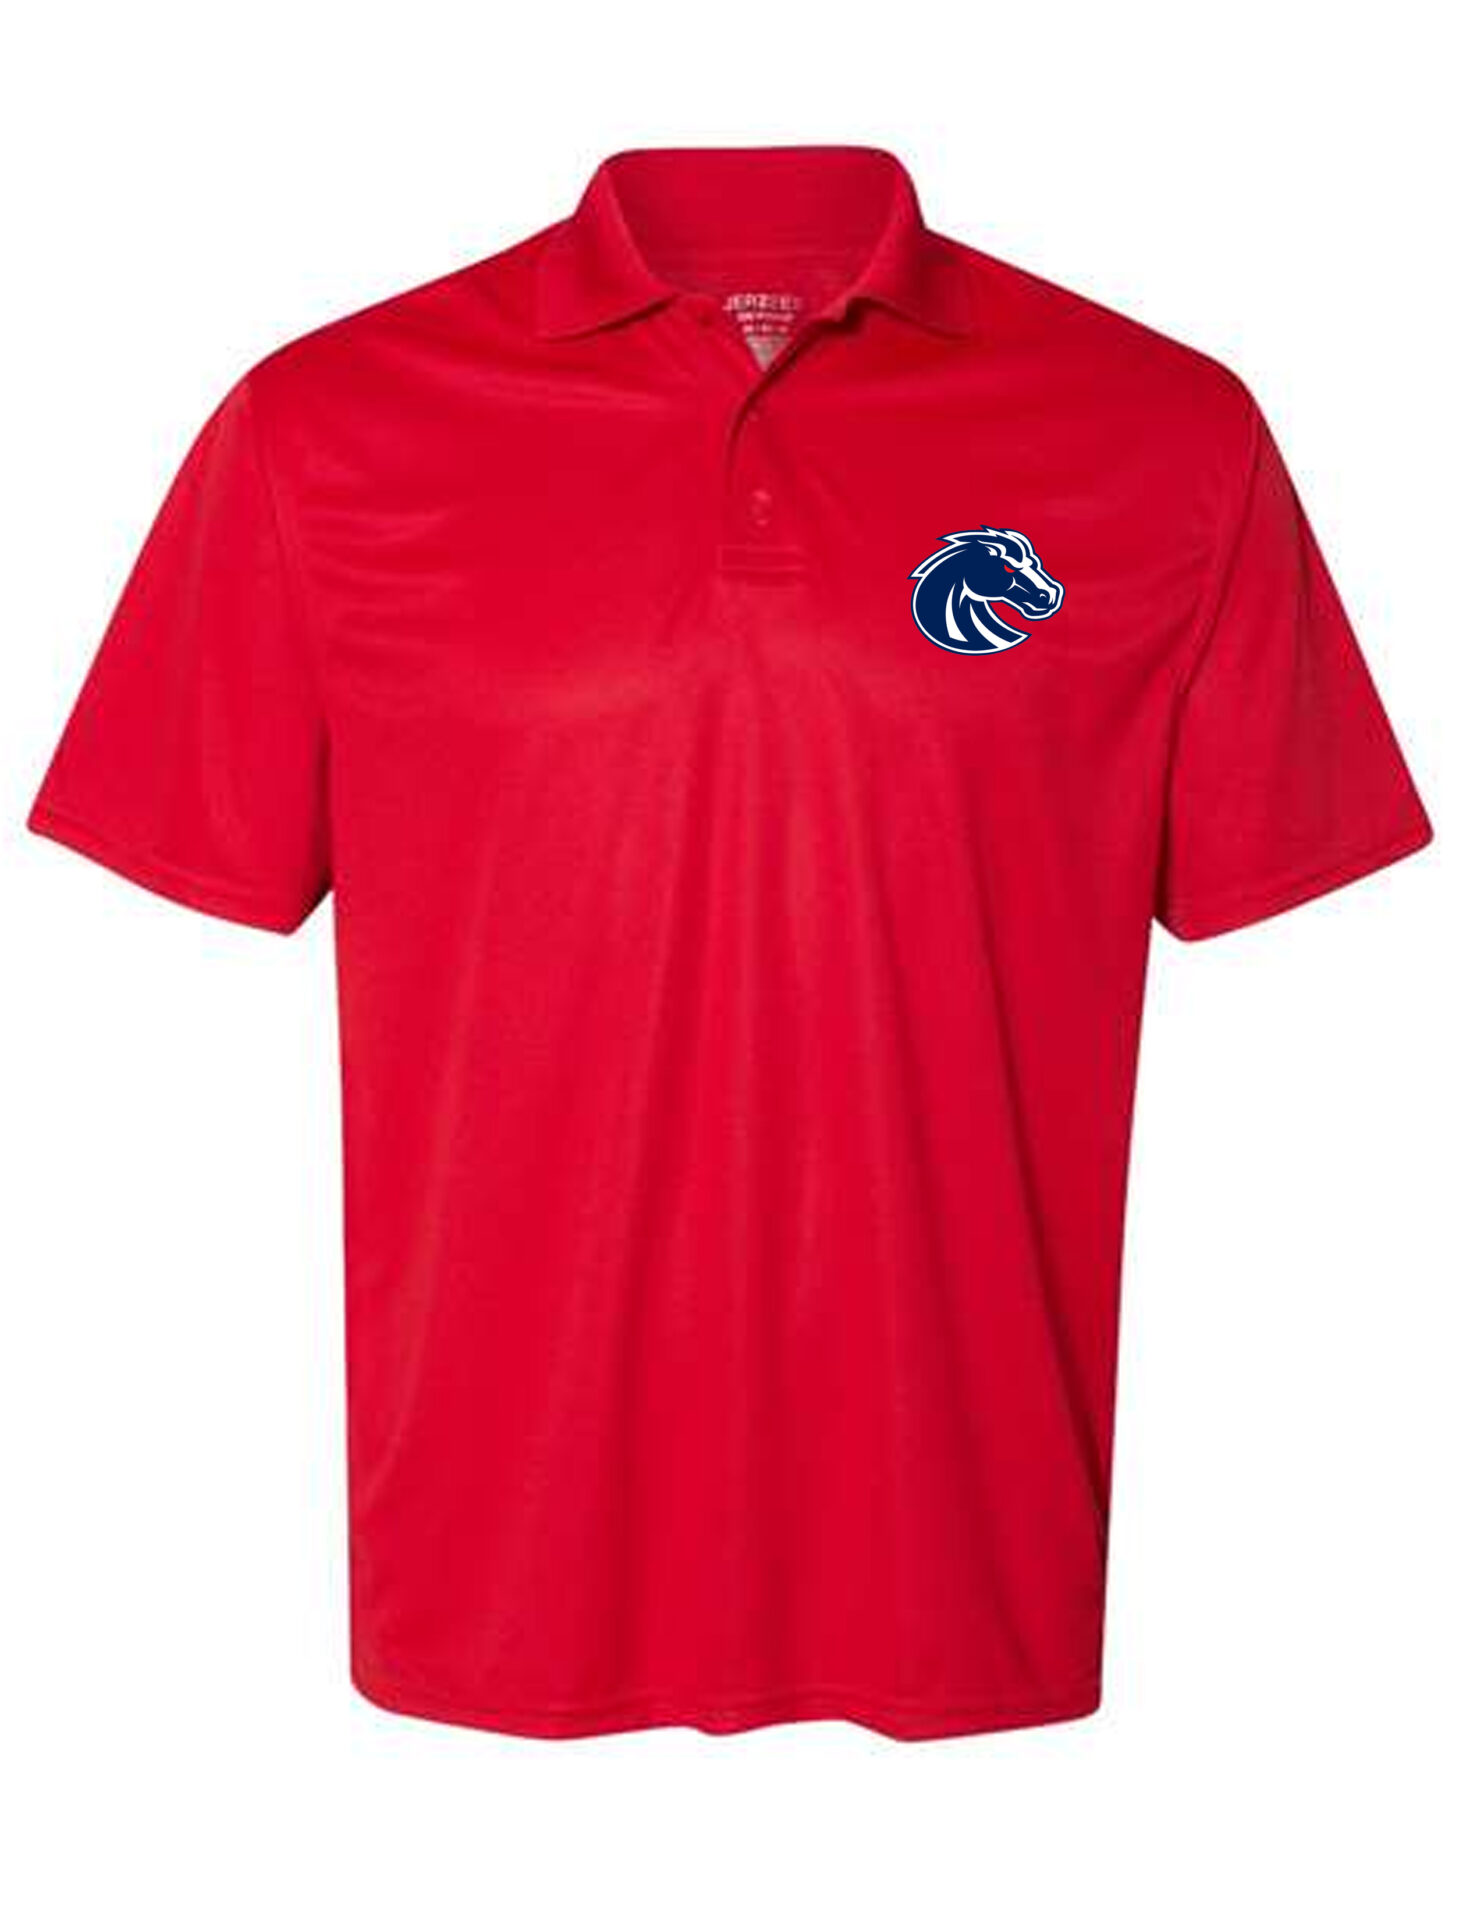 Red Polo T Shirt with horse logo